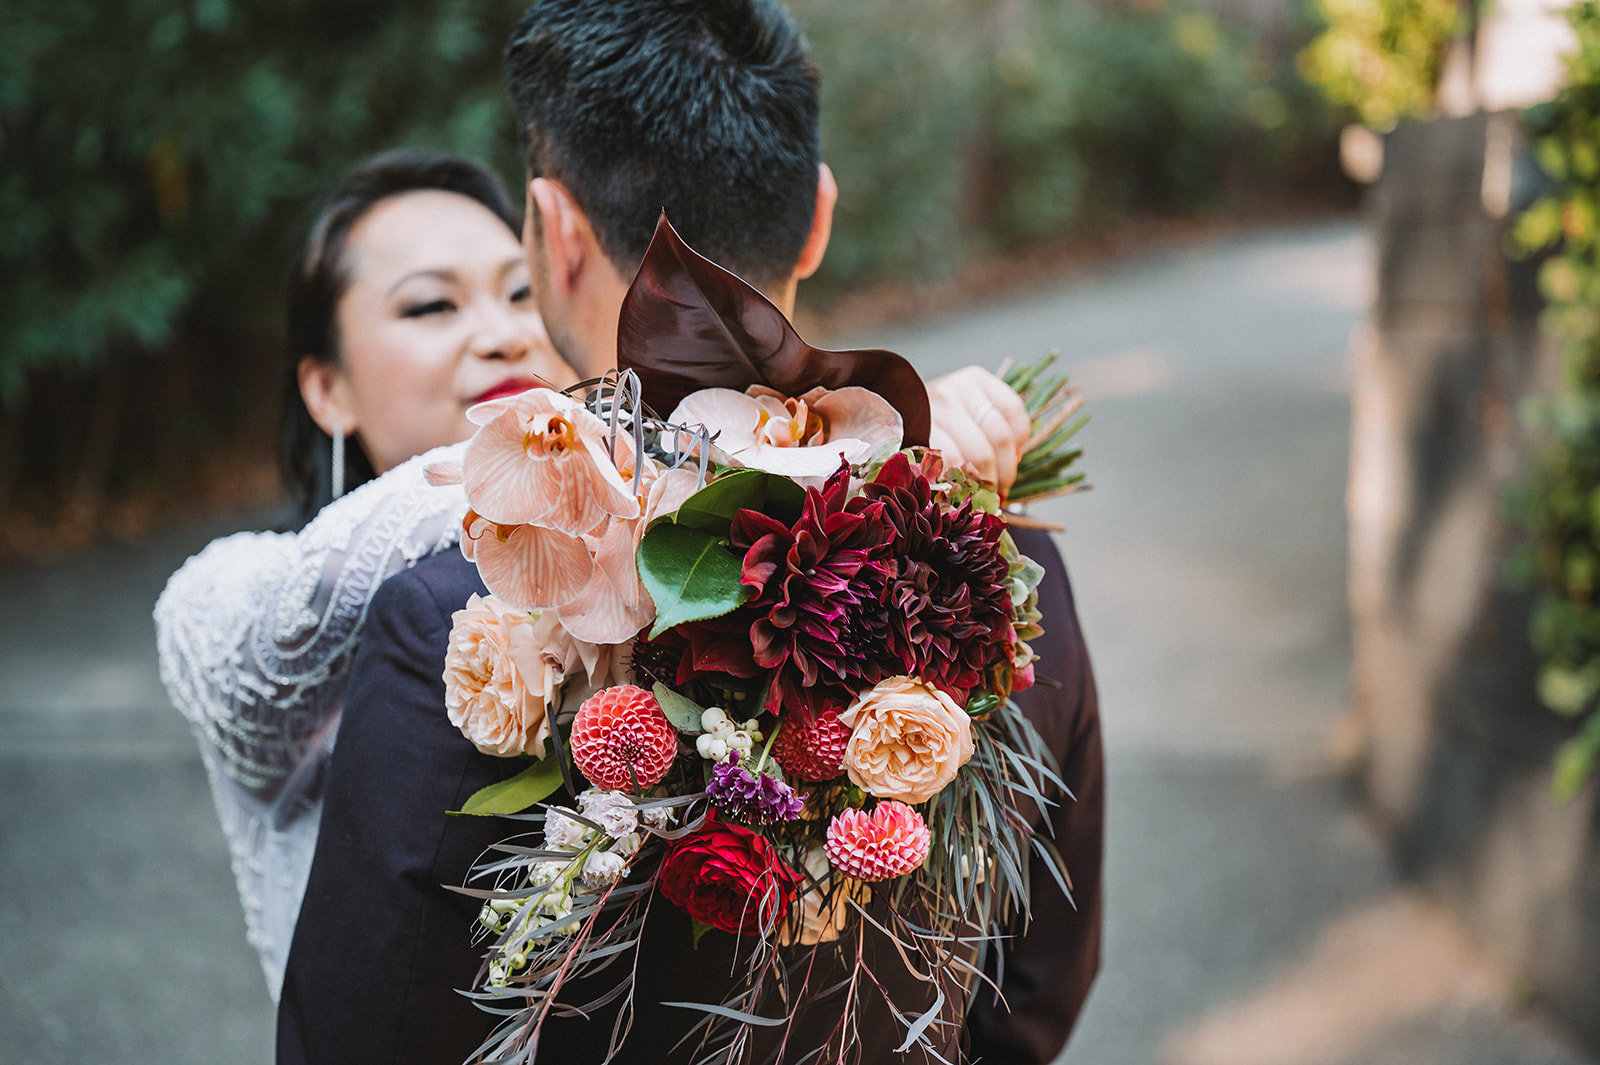 Editorial and candid wedding photography in Dandenong Ranges, Melbourne, Victoria